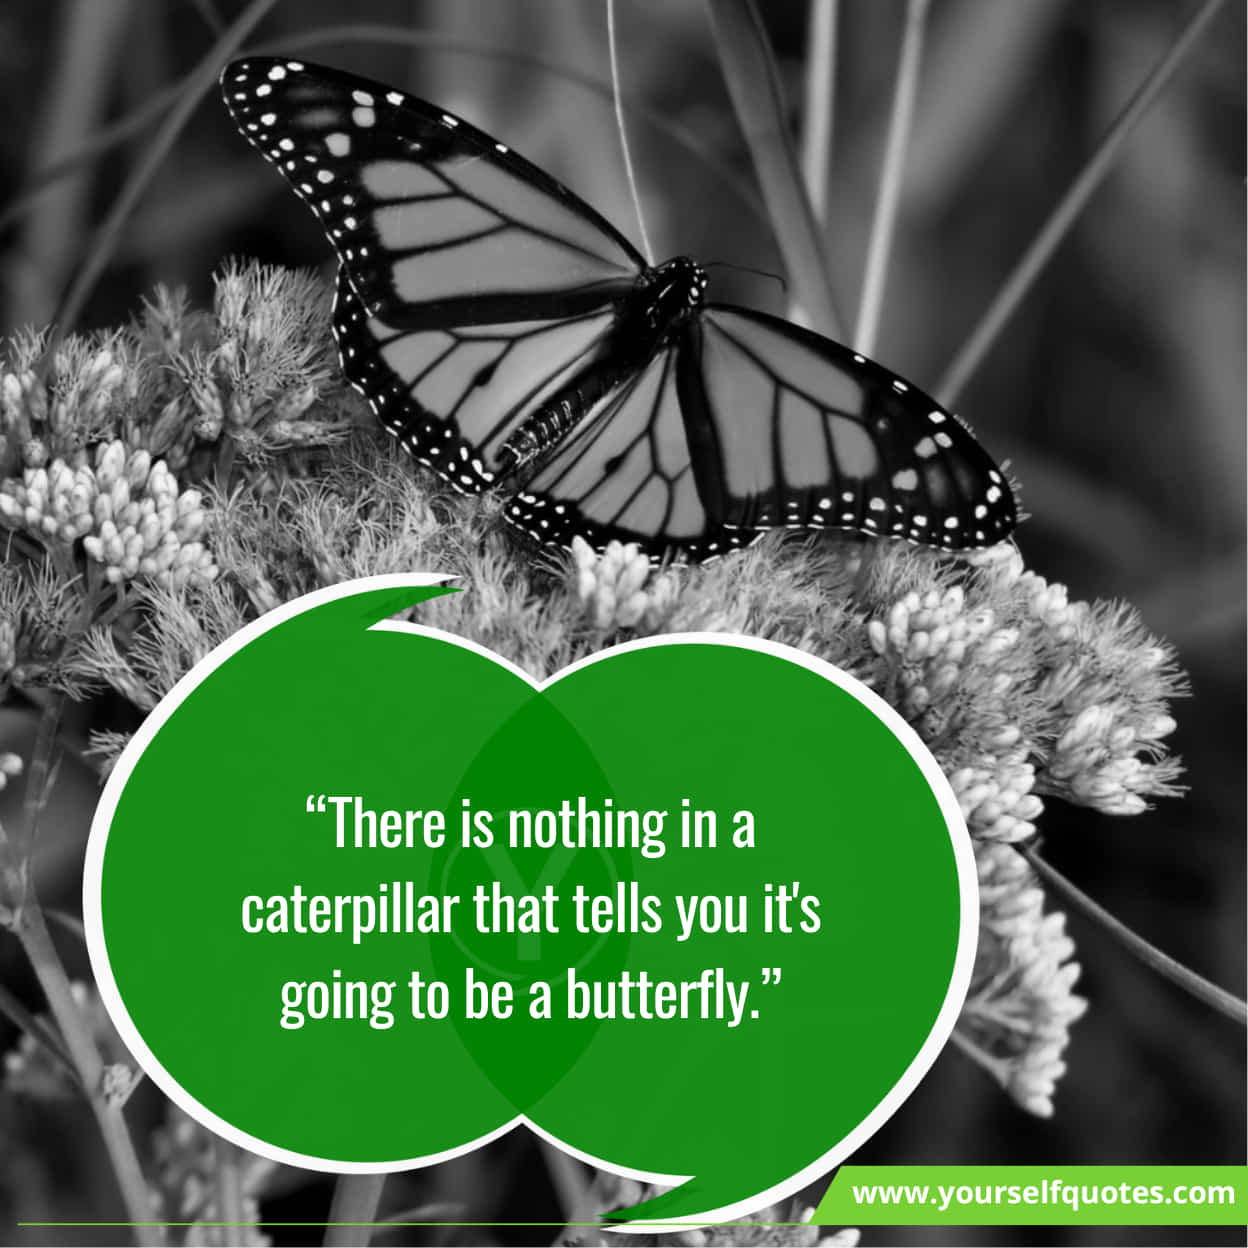 Best Inspiring Butterfly Quotes About Life